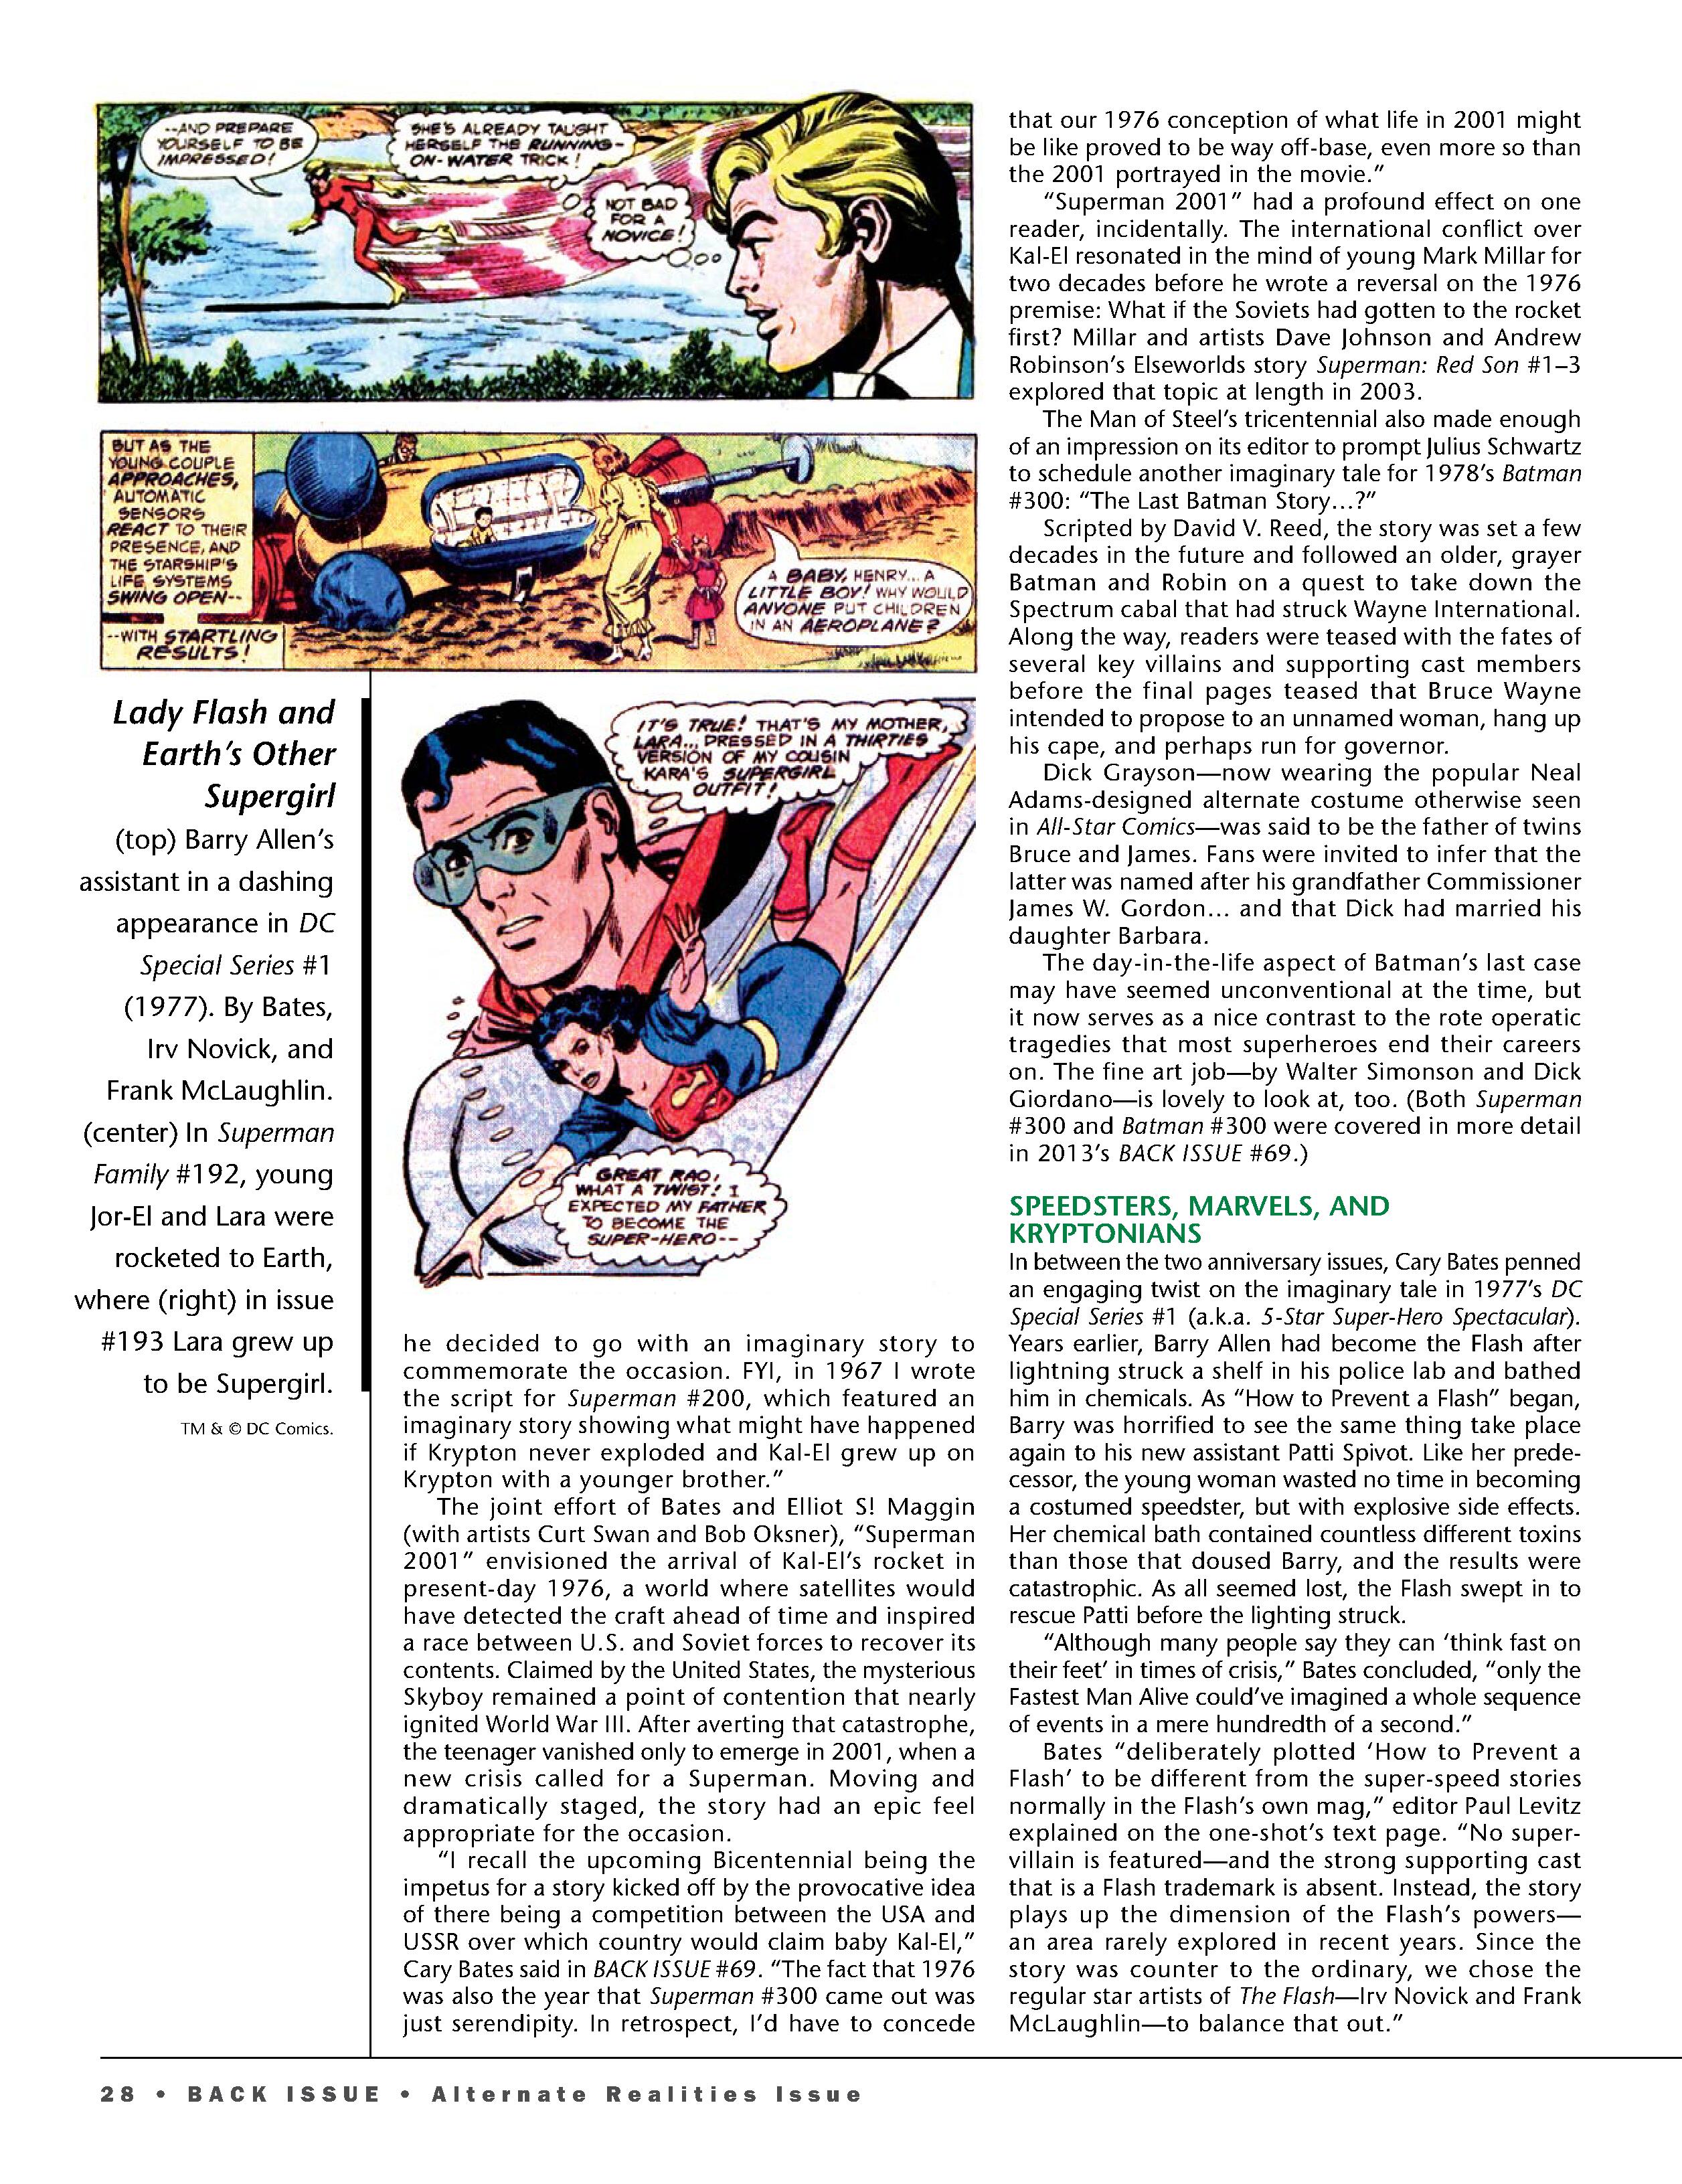 Read online Back Issue comic -  Issue #111 - 30